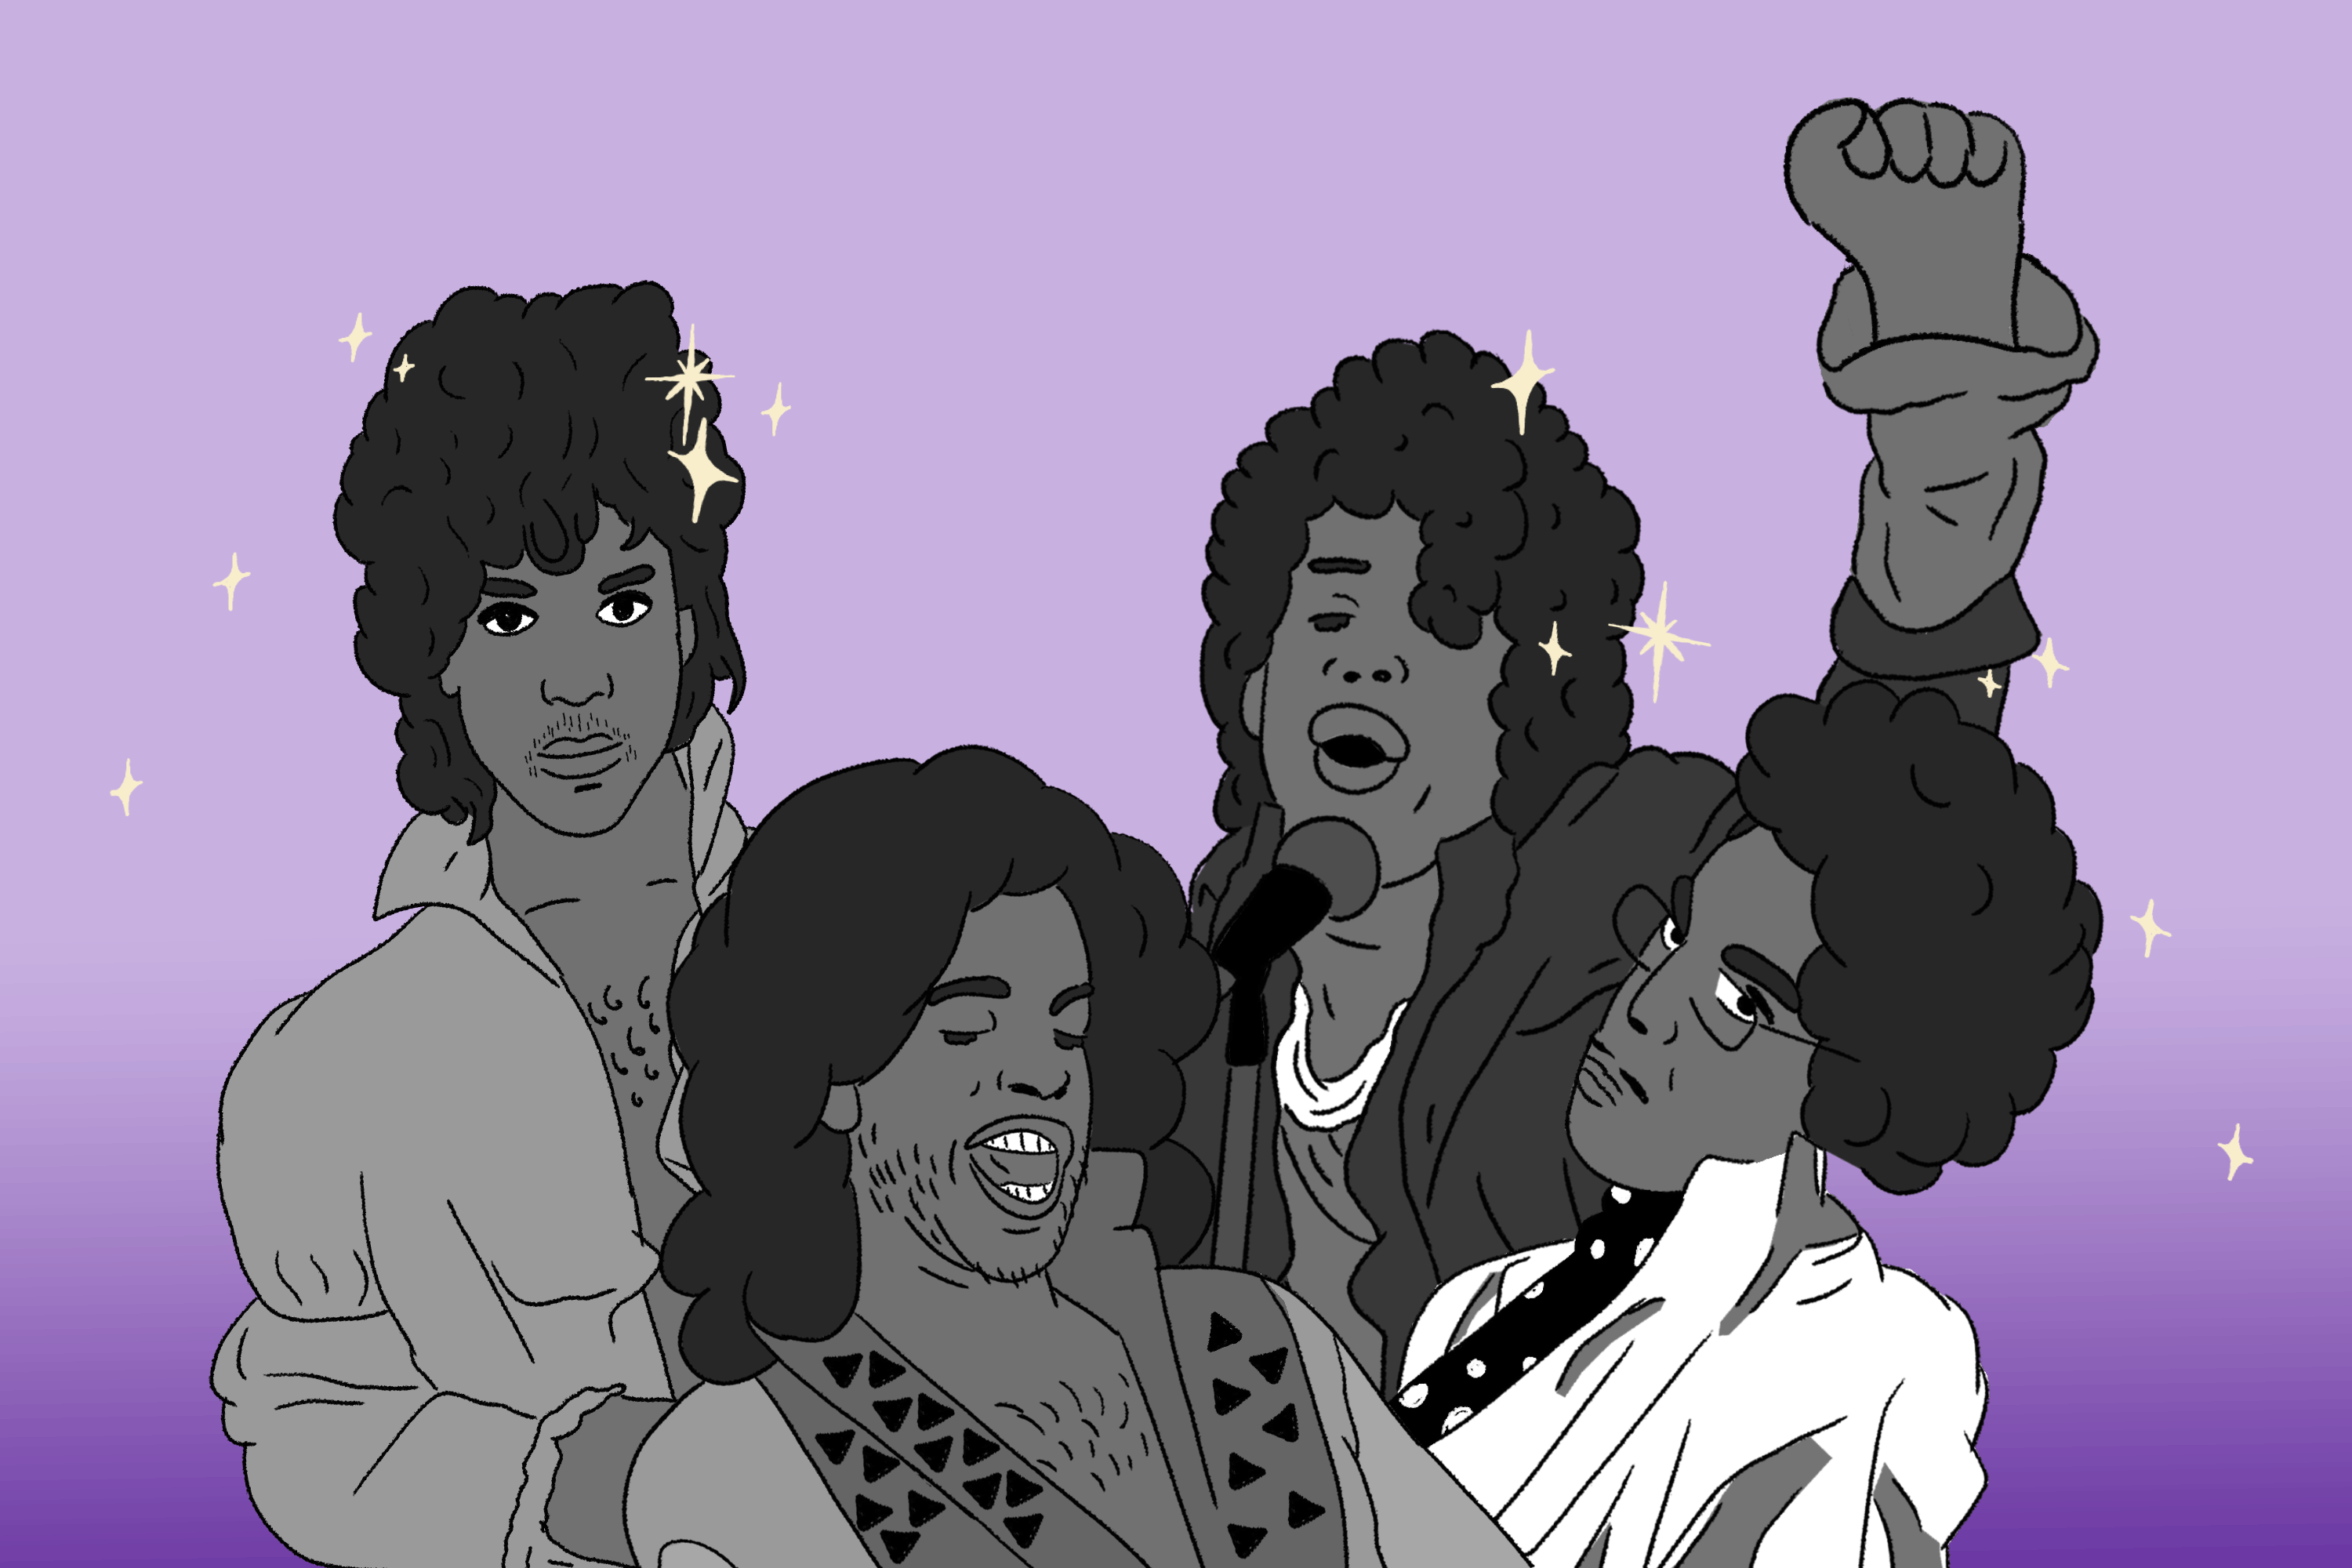 Prince over the years